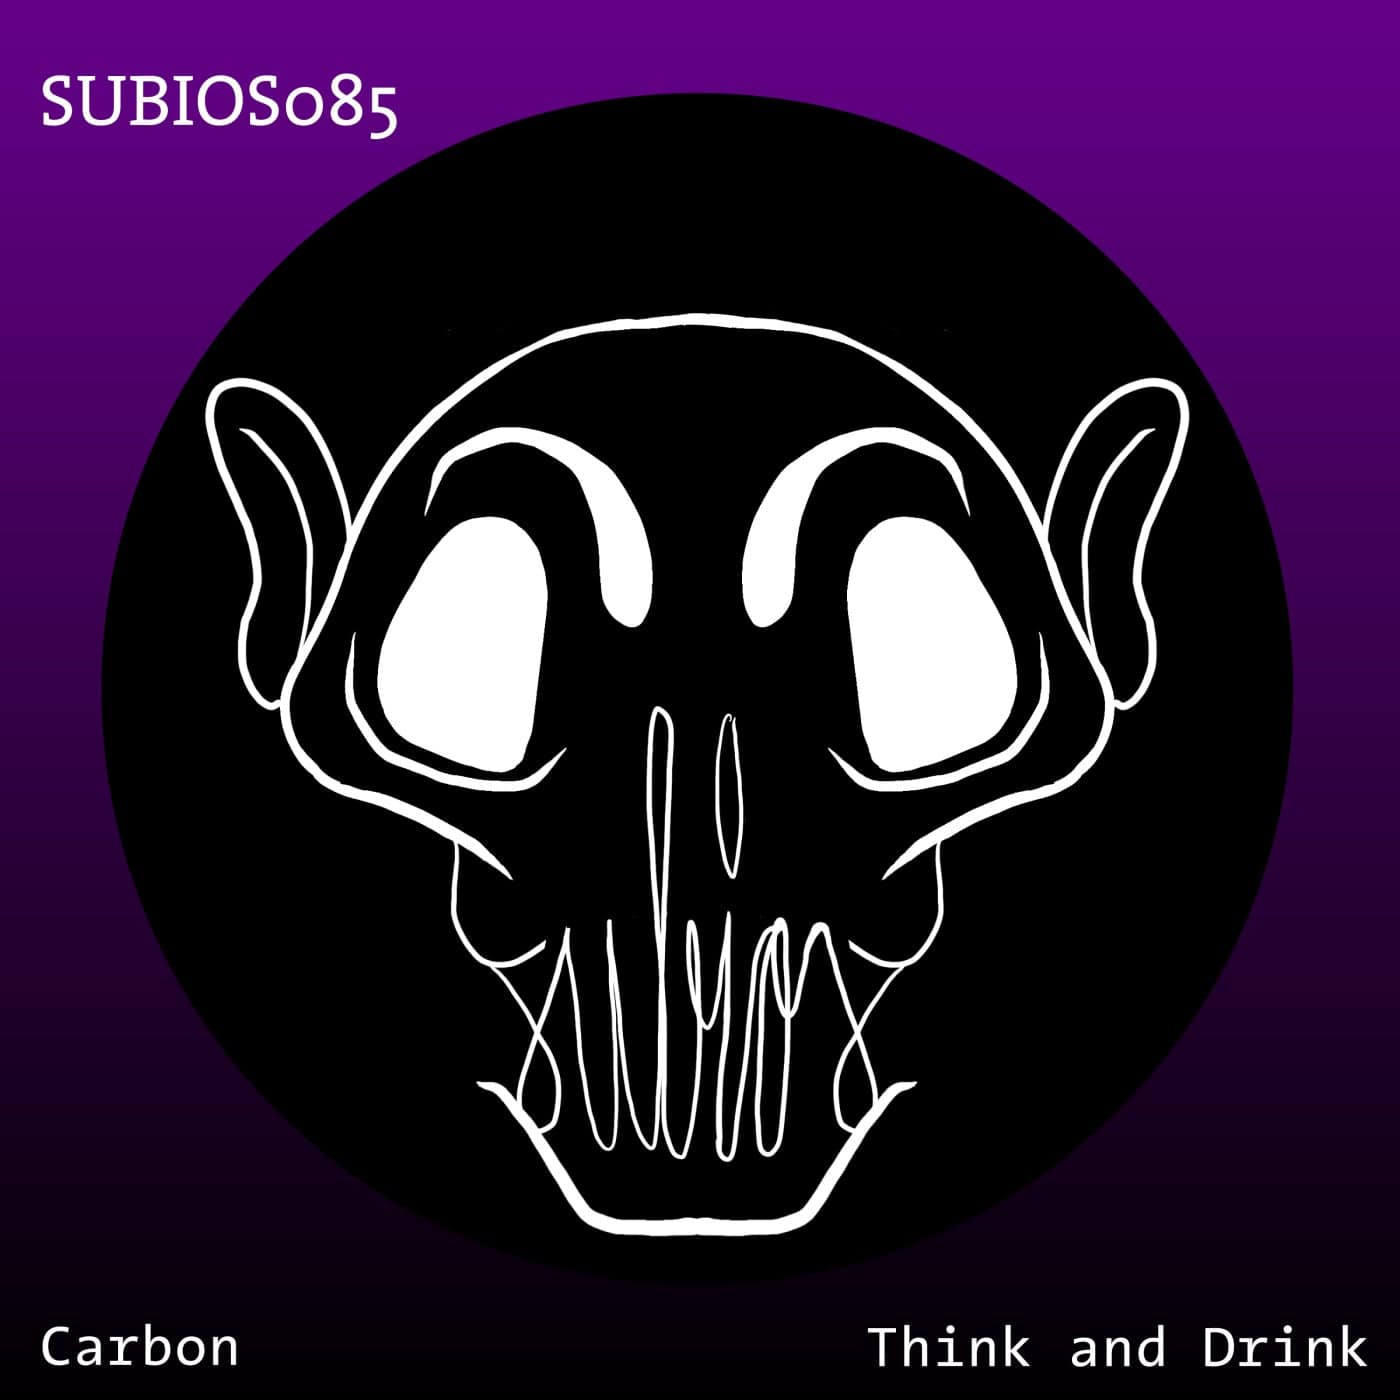 Download Carbon - Think and Drink [SUBIOS085] on Electrobuzz